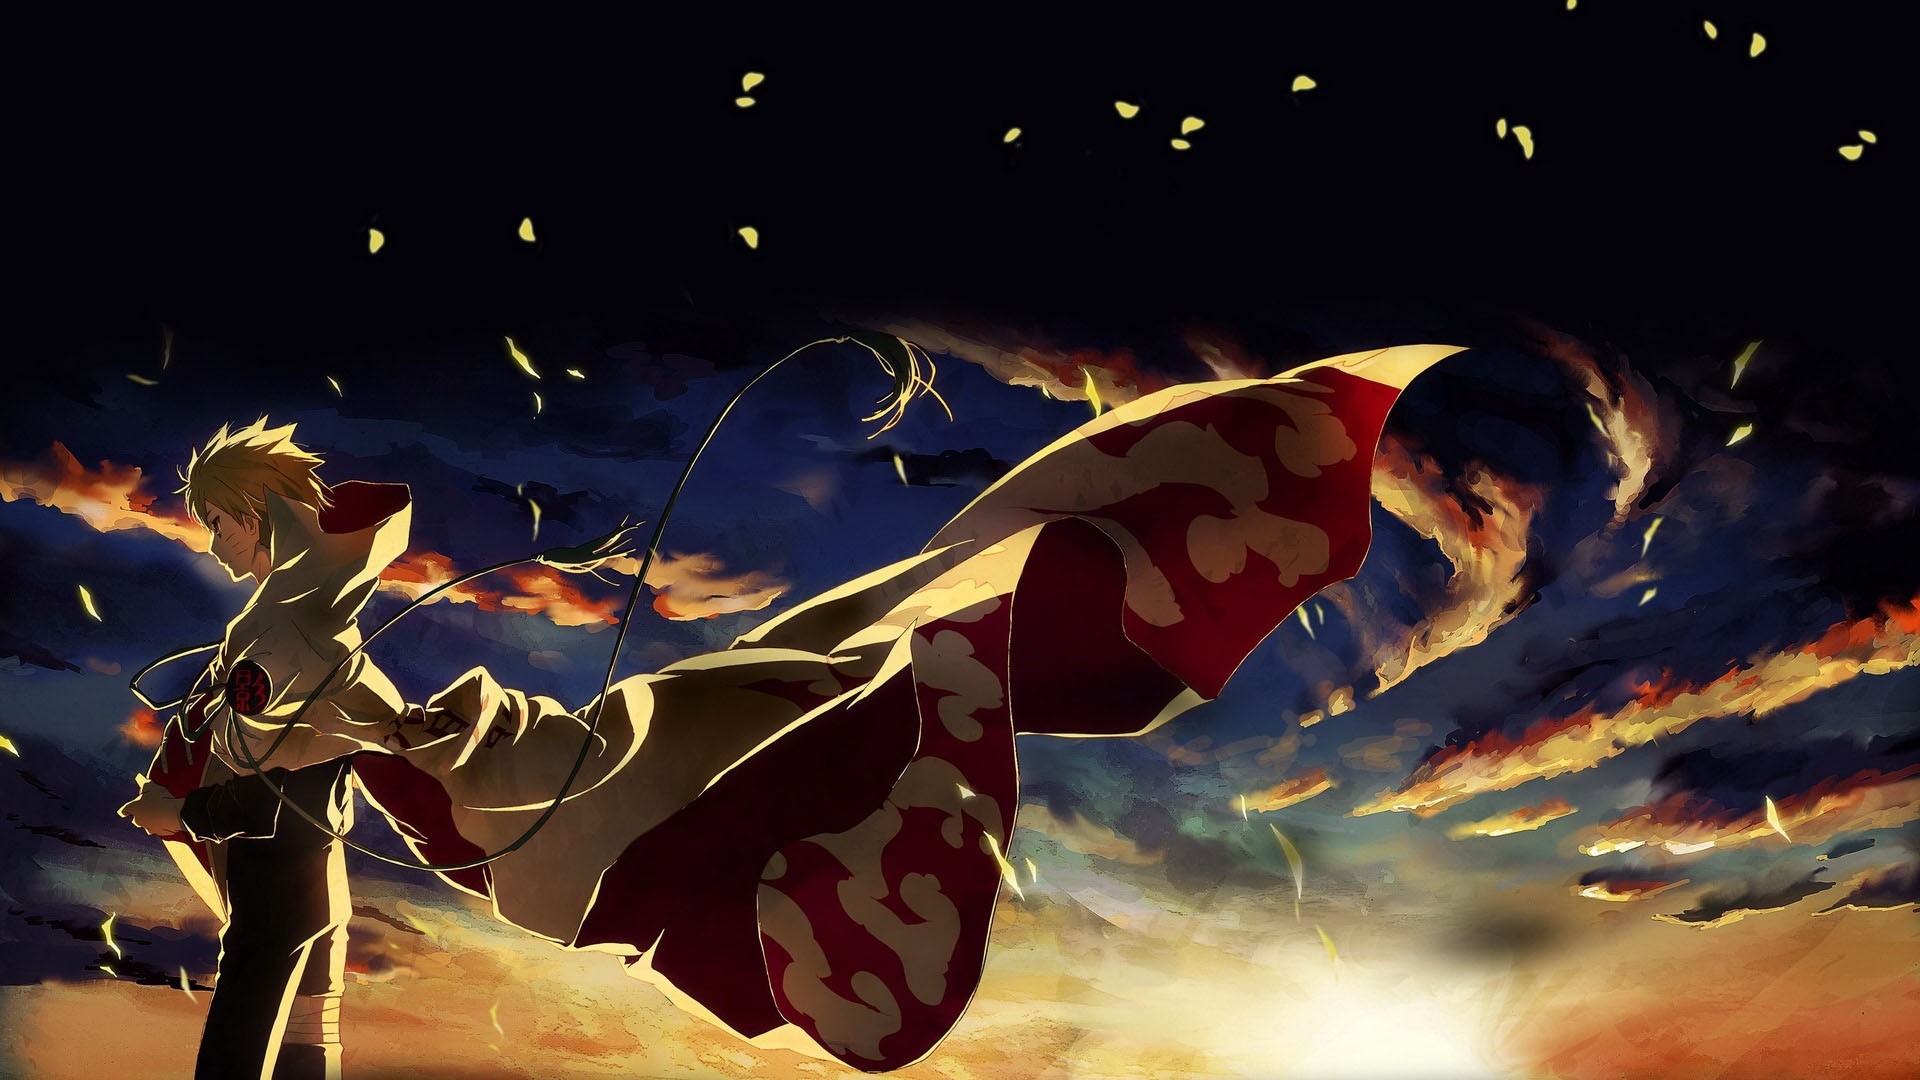 1920x1080 ... Awesome Anime Wallpaper 7 Cool Anime Wallpapers HD 6617 ...